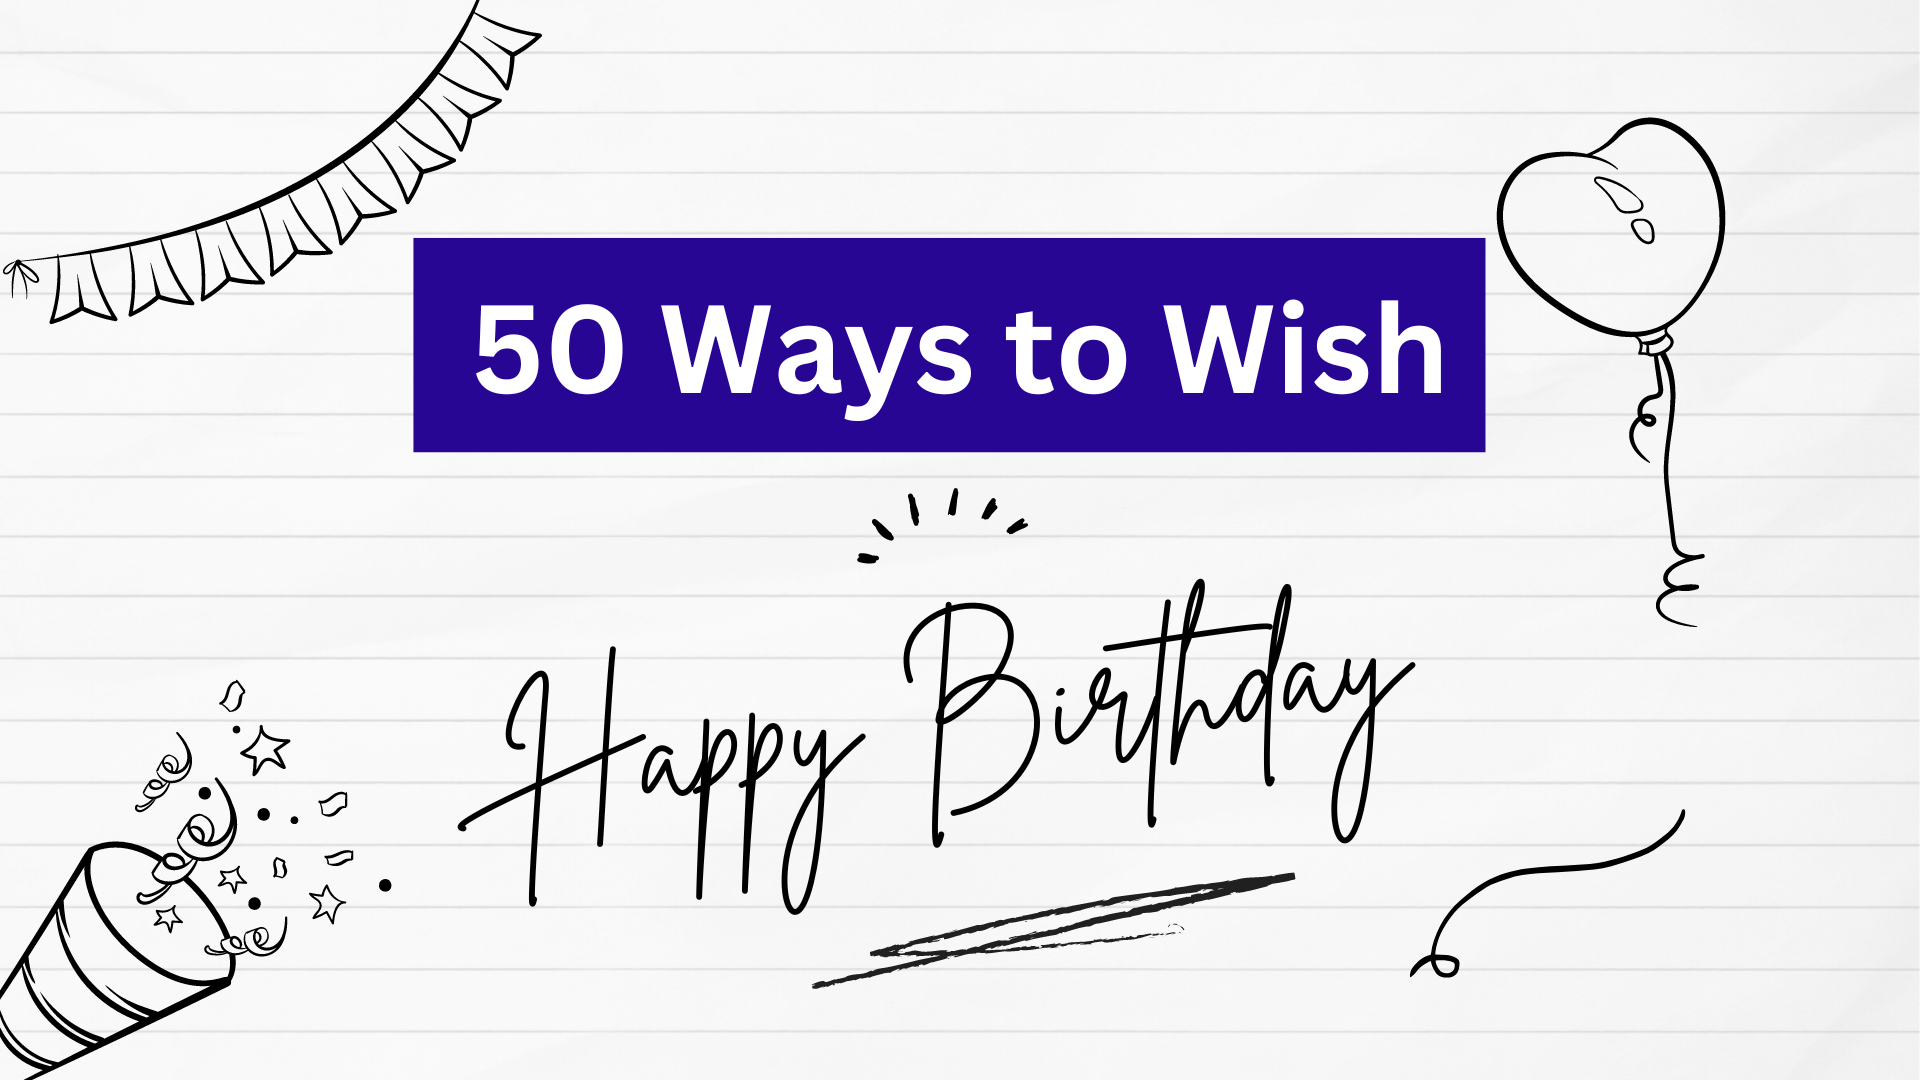 50 Ways To Wish Happy Birthday With Hindi Meaning